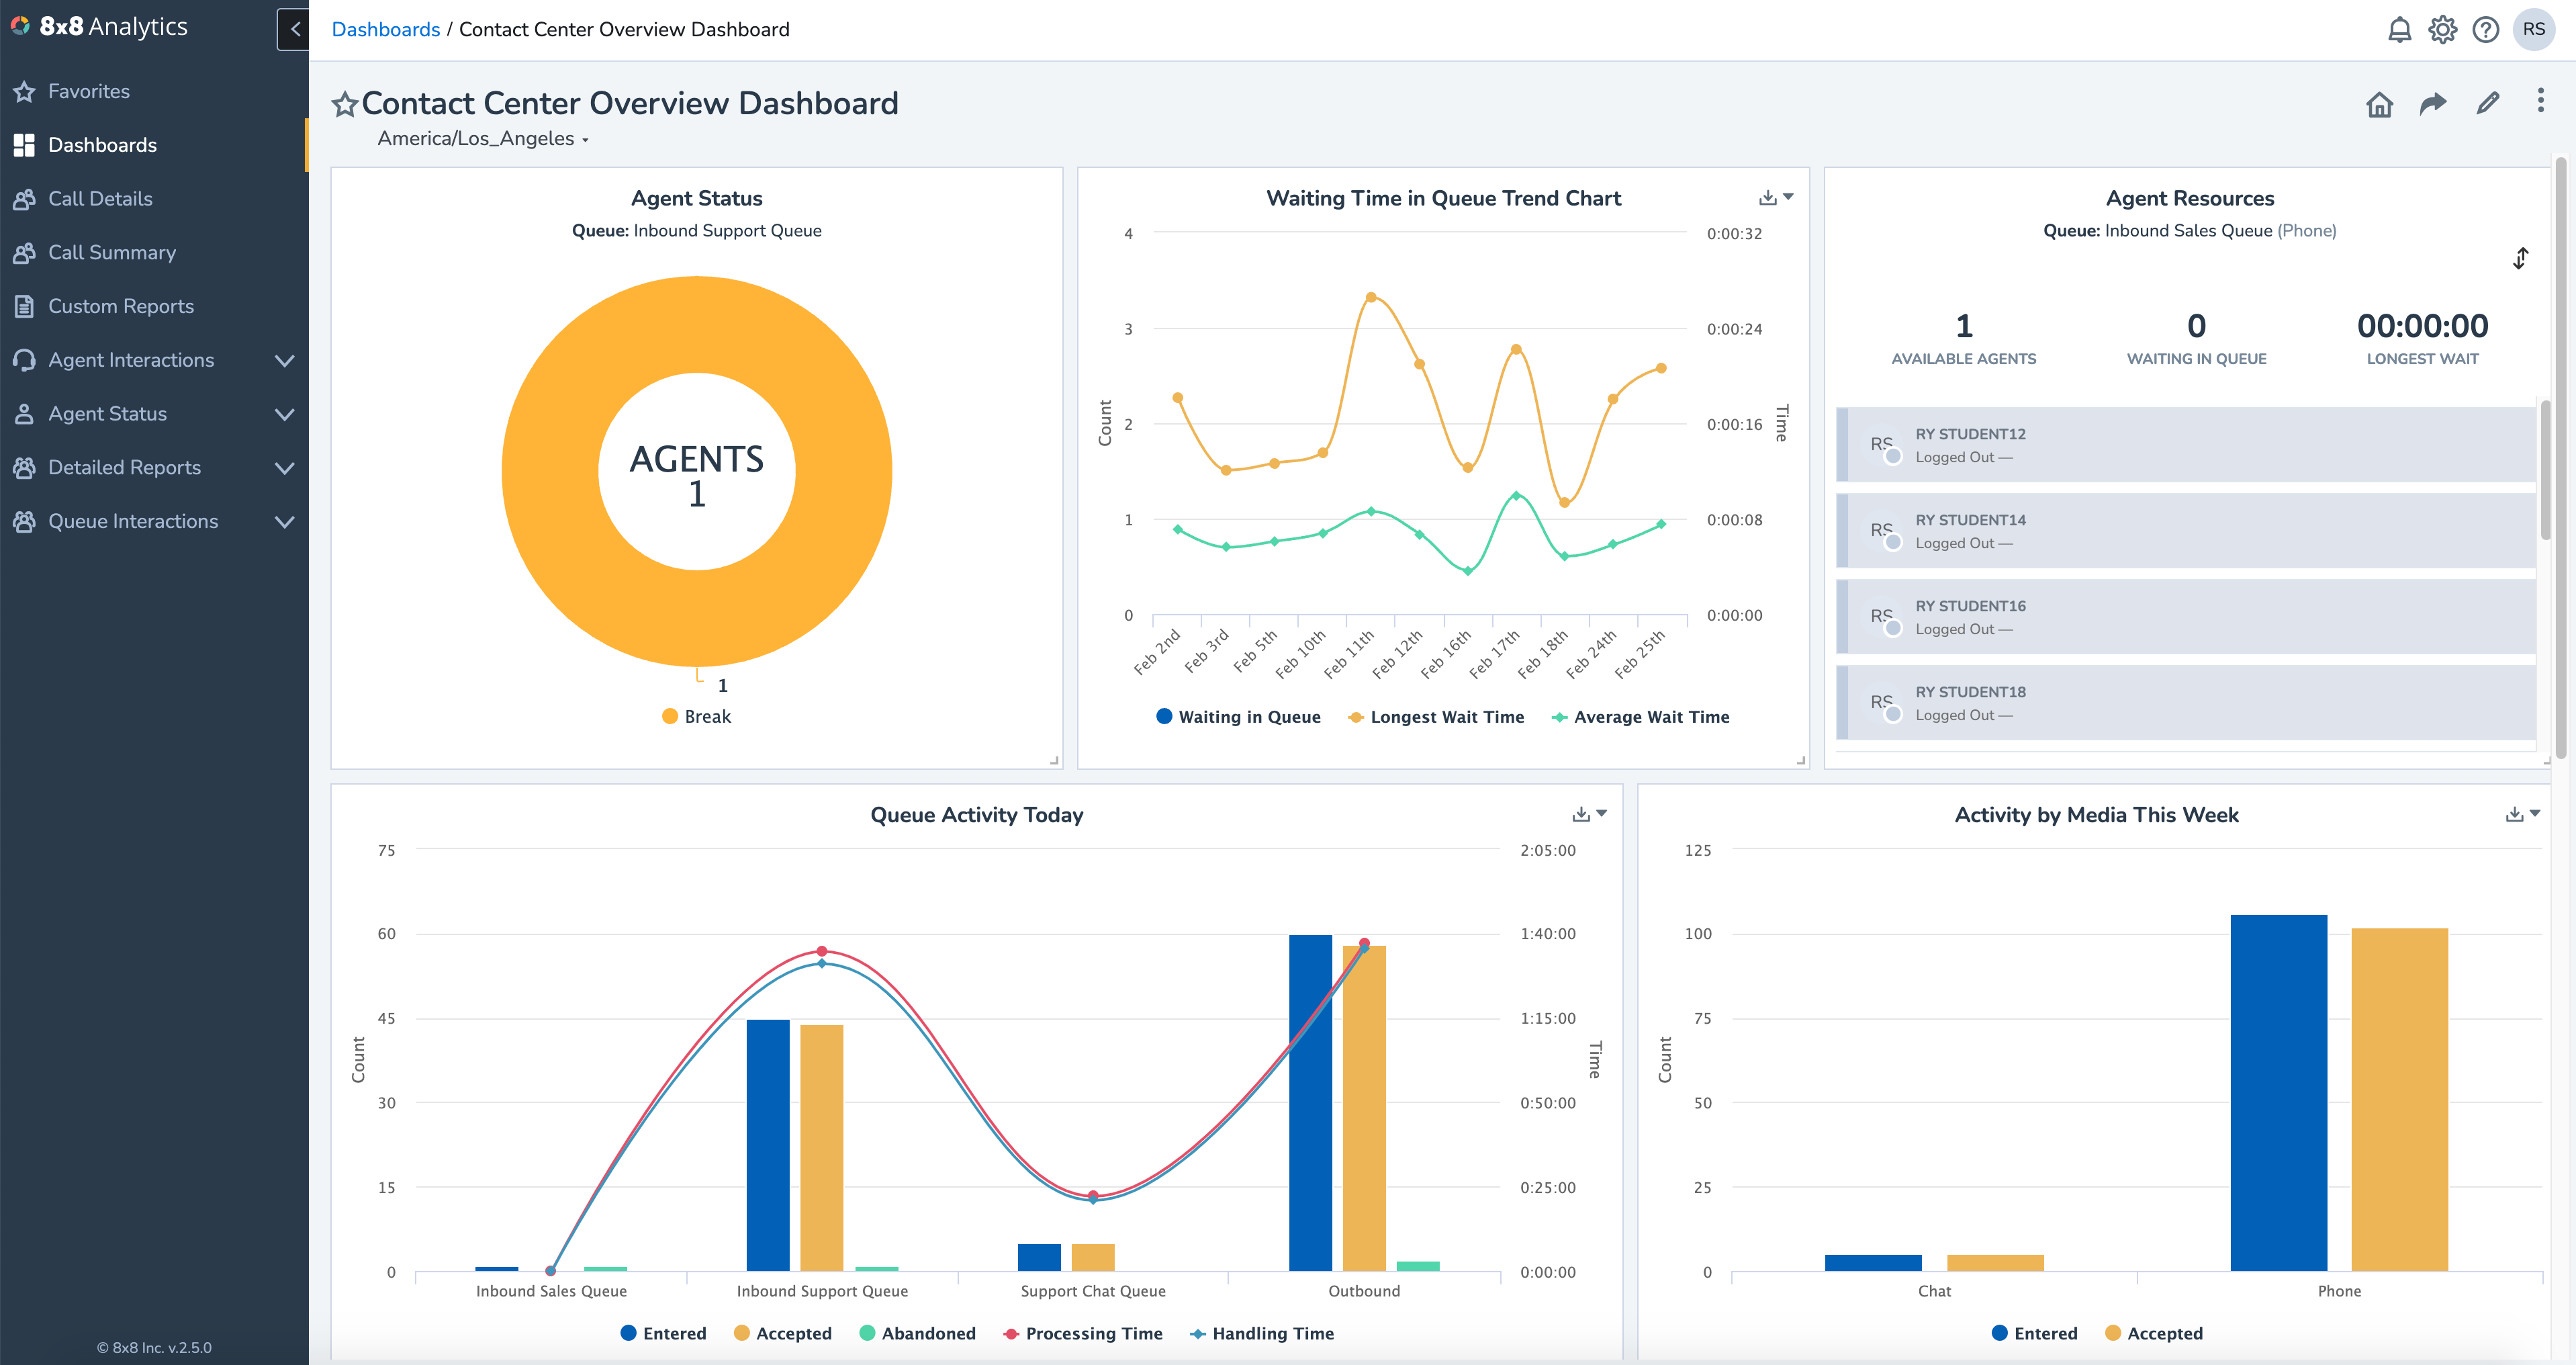 CC-analytics-overview-dashboard-ui.png